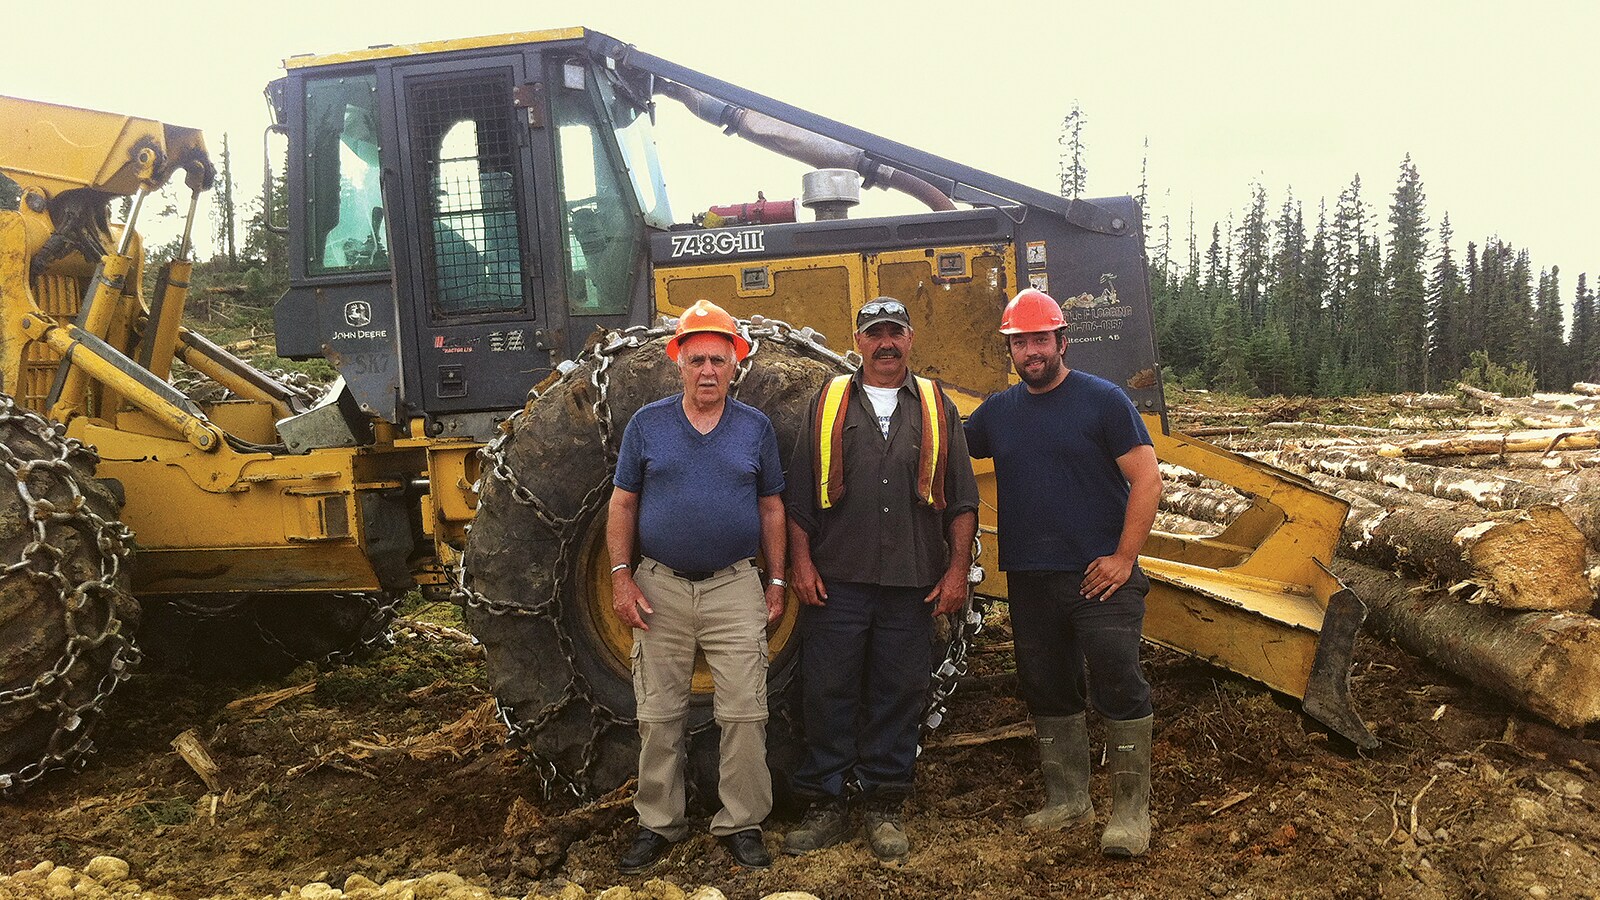  Three men from the Freake family stand in front of their 548G-III Skidder